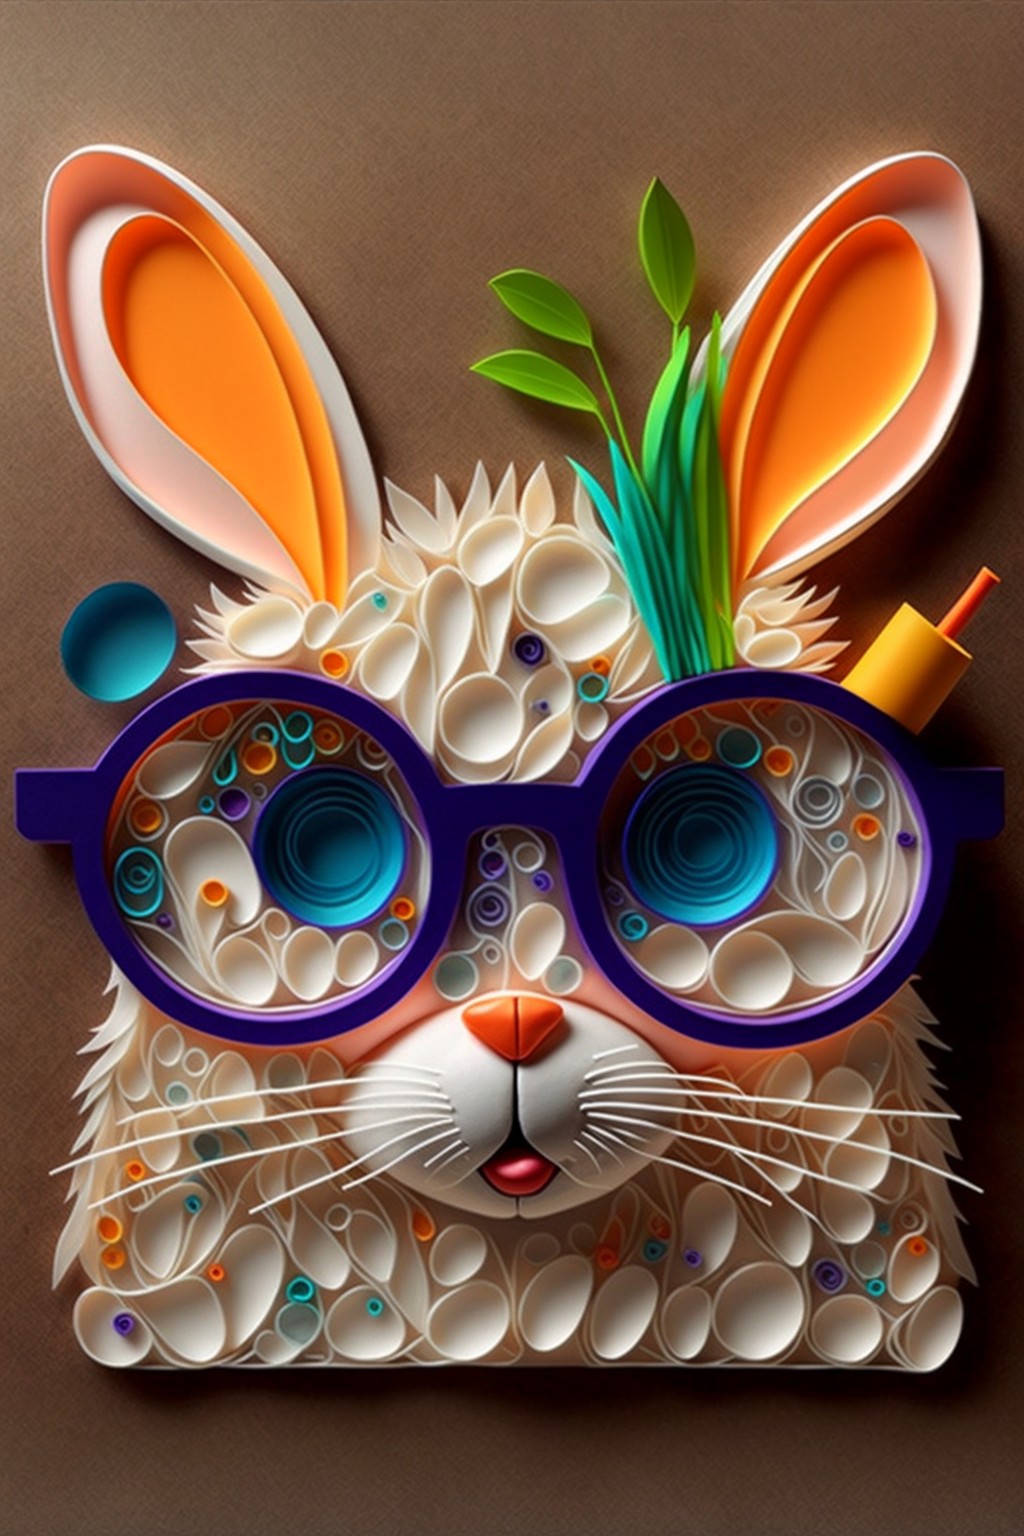 Rabbit paper cut avatar with glasses